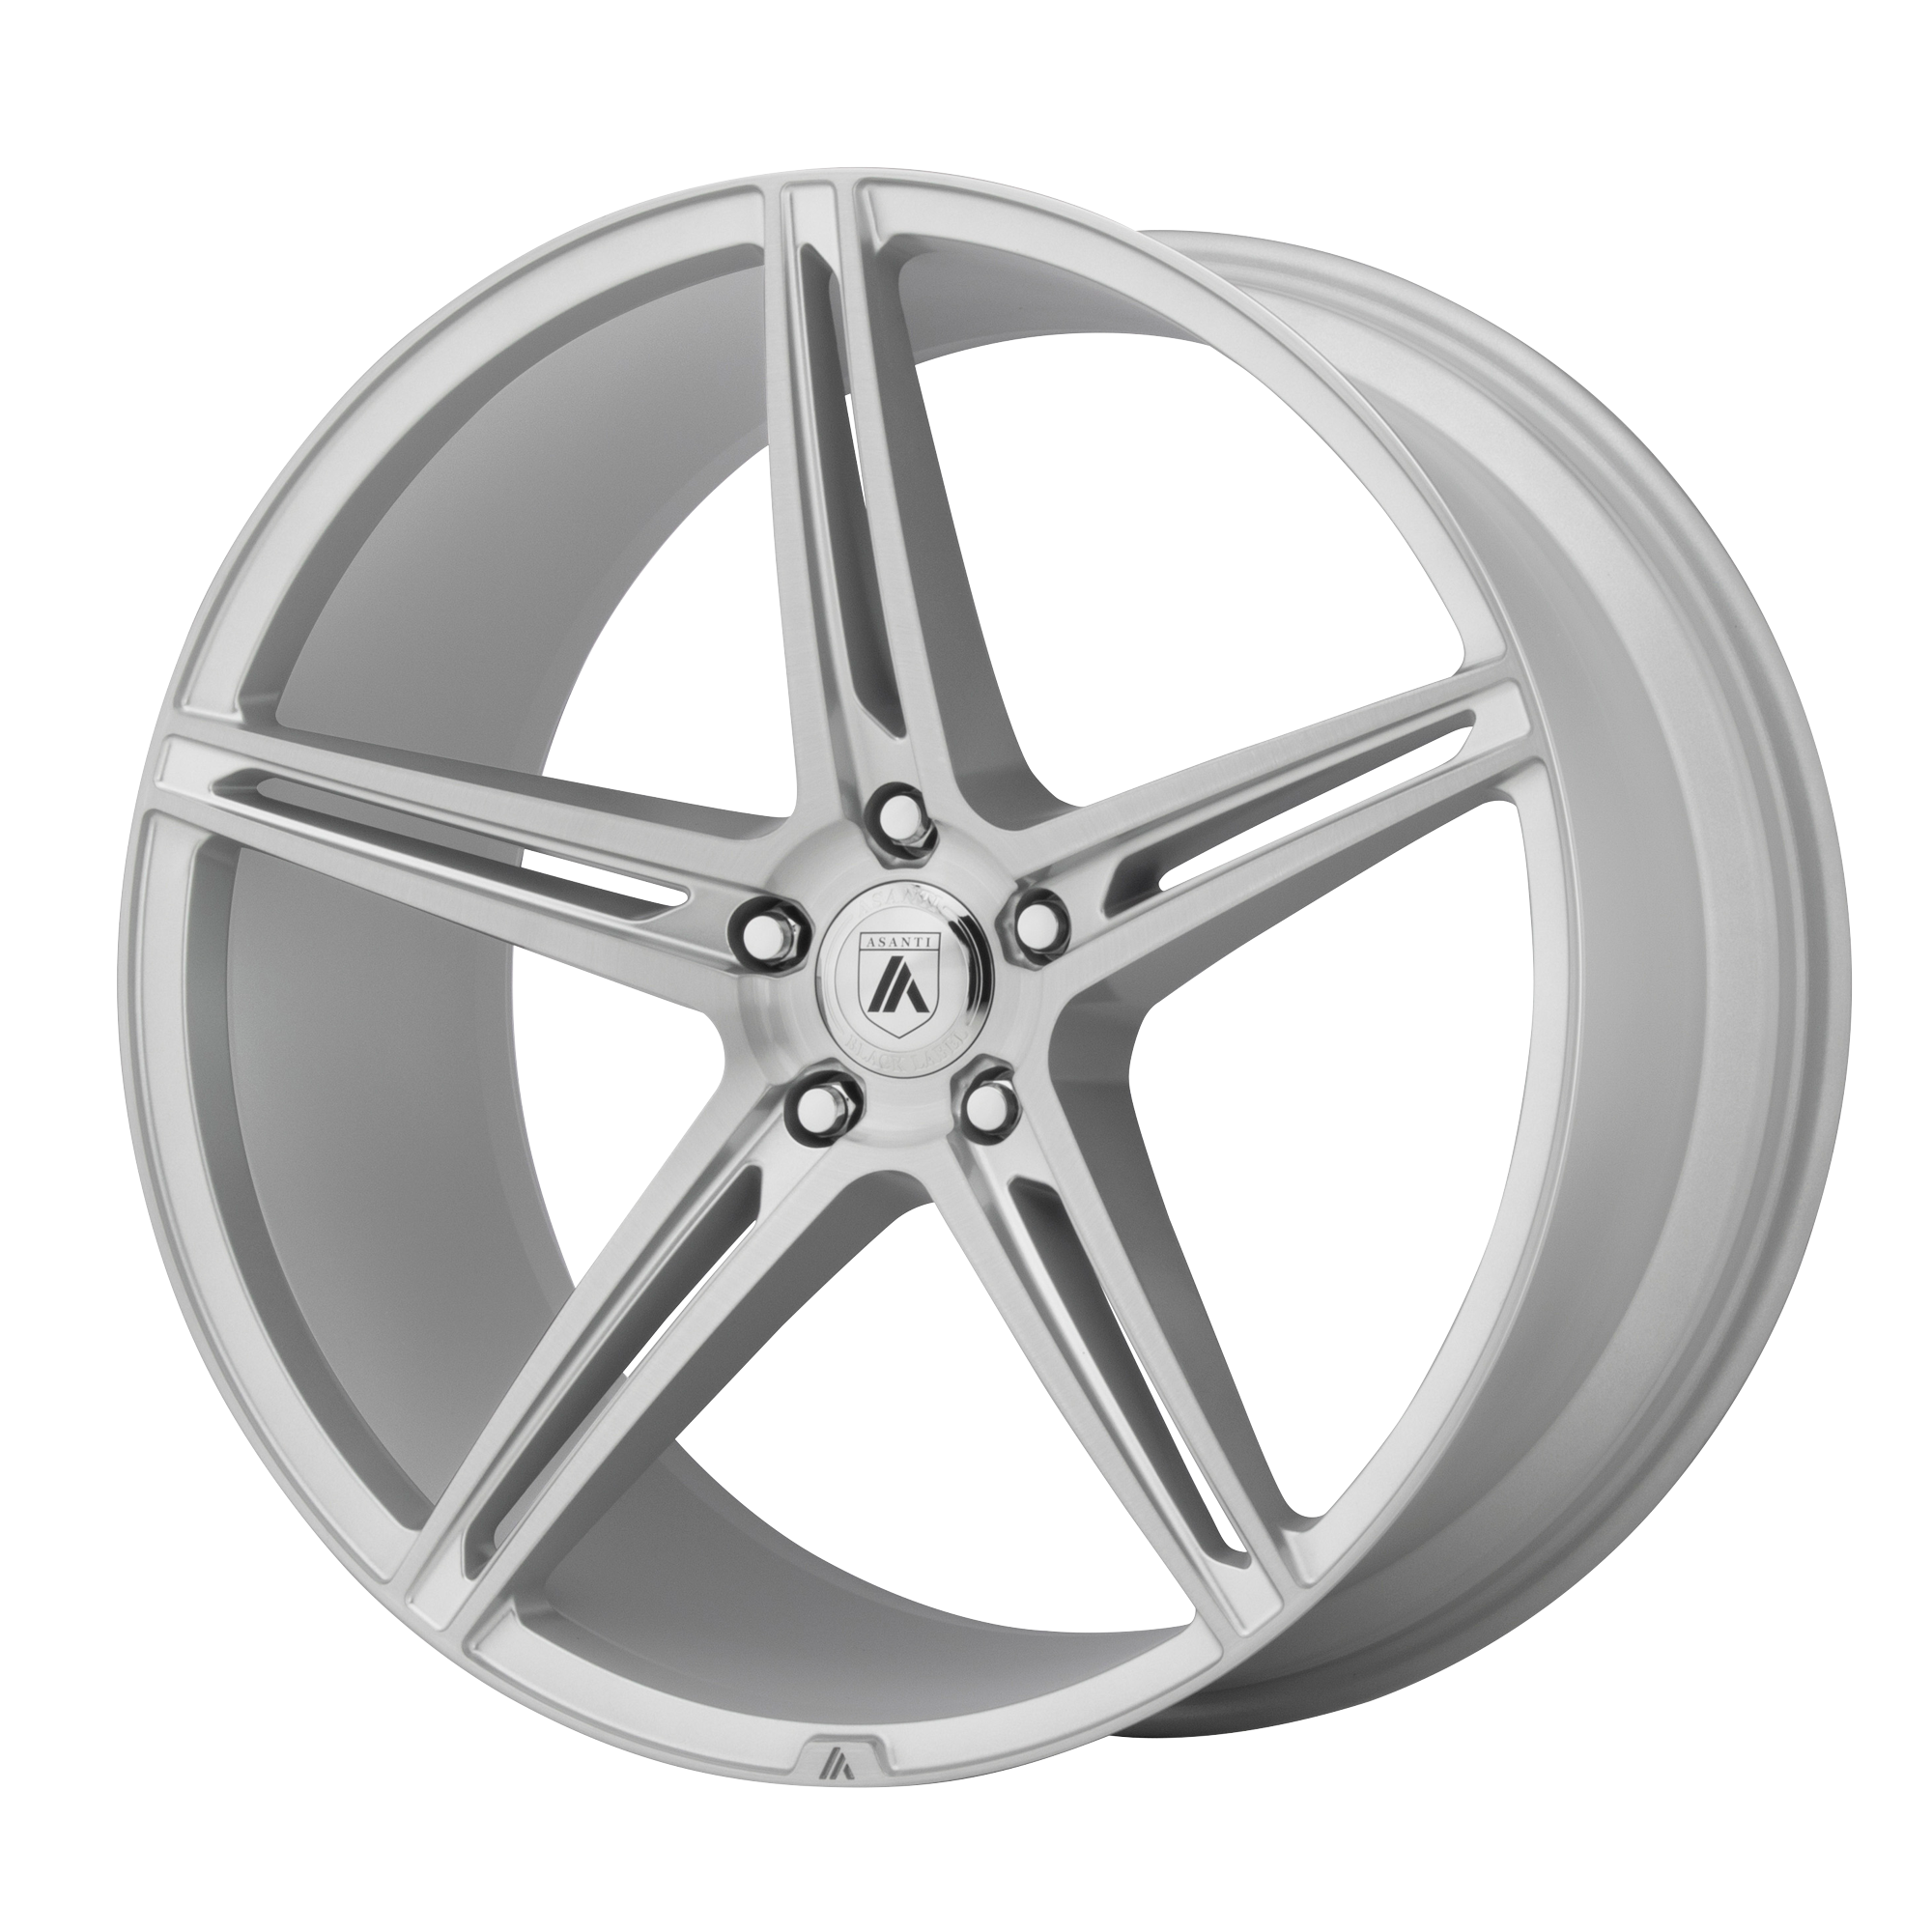 ALPHA 5 20x10.5 Blank BRUSHED SILVER (38 mm) - Tires and Engine Performance